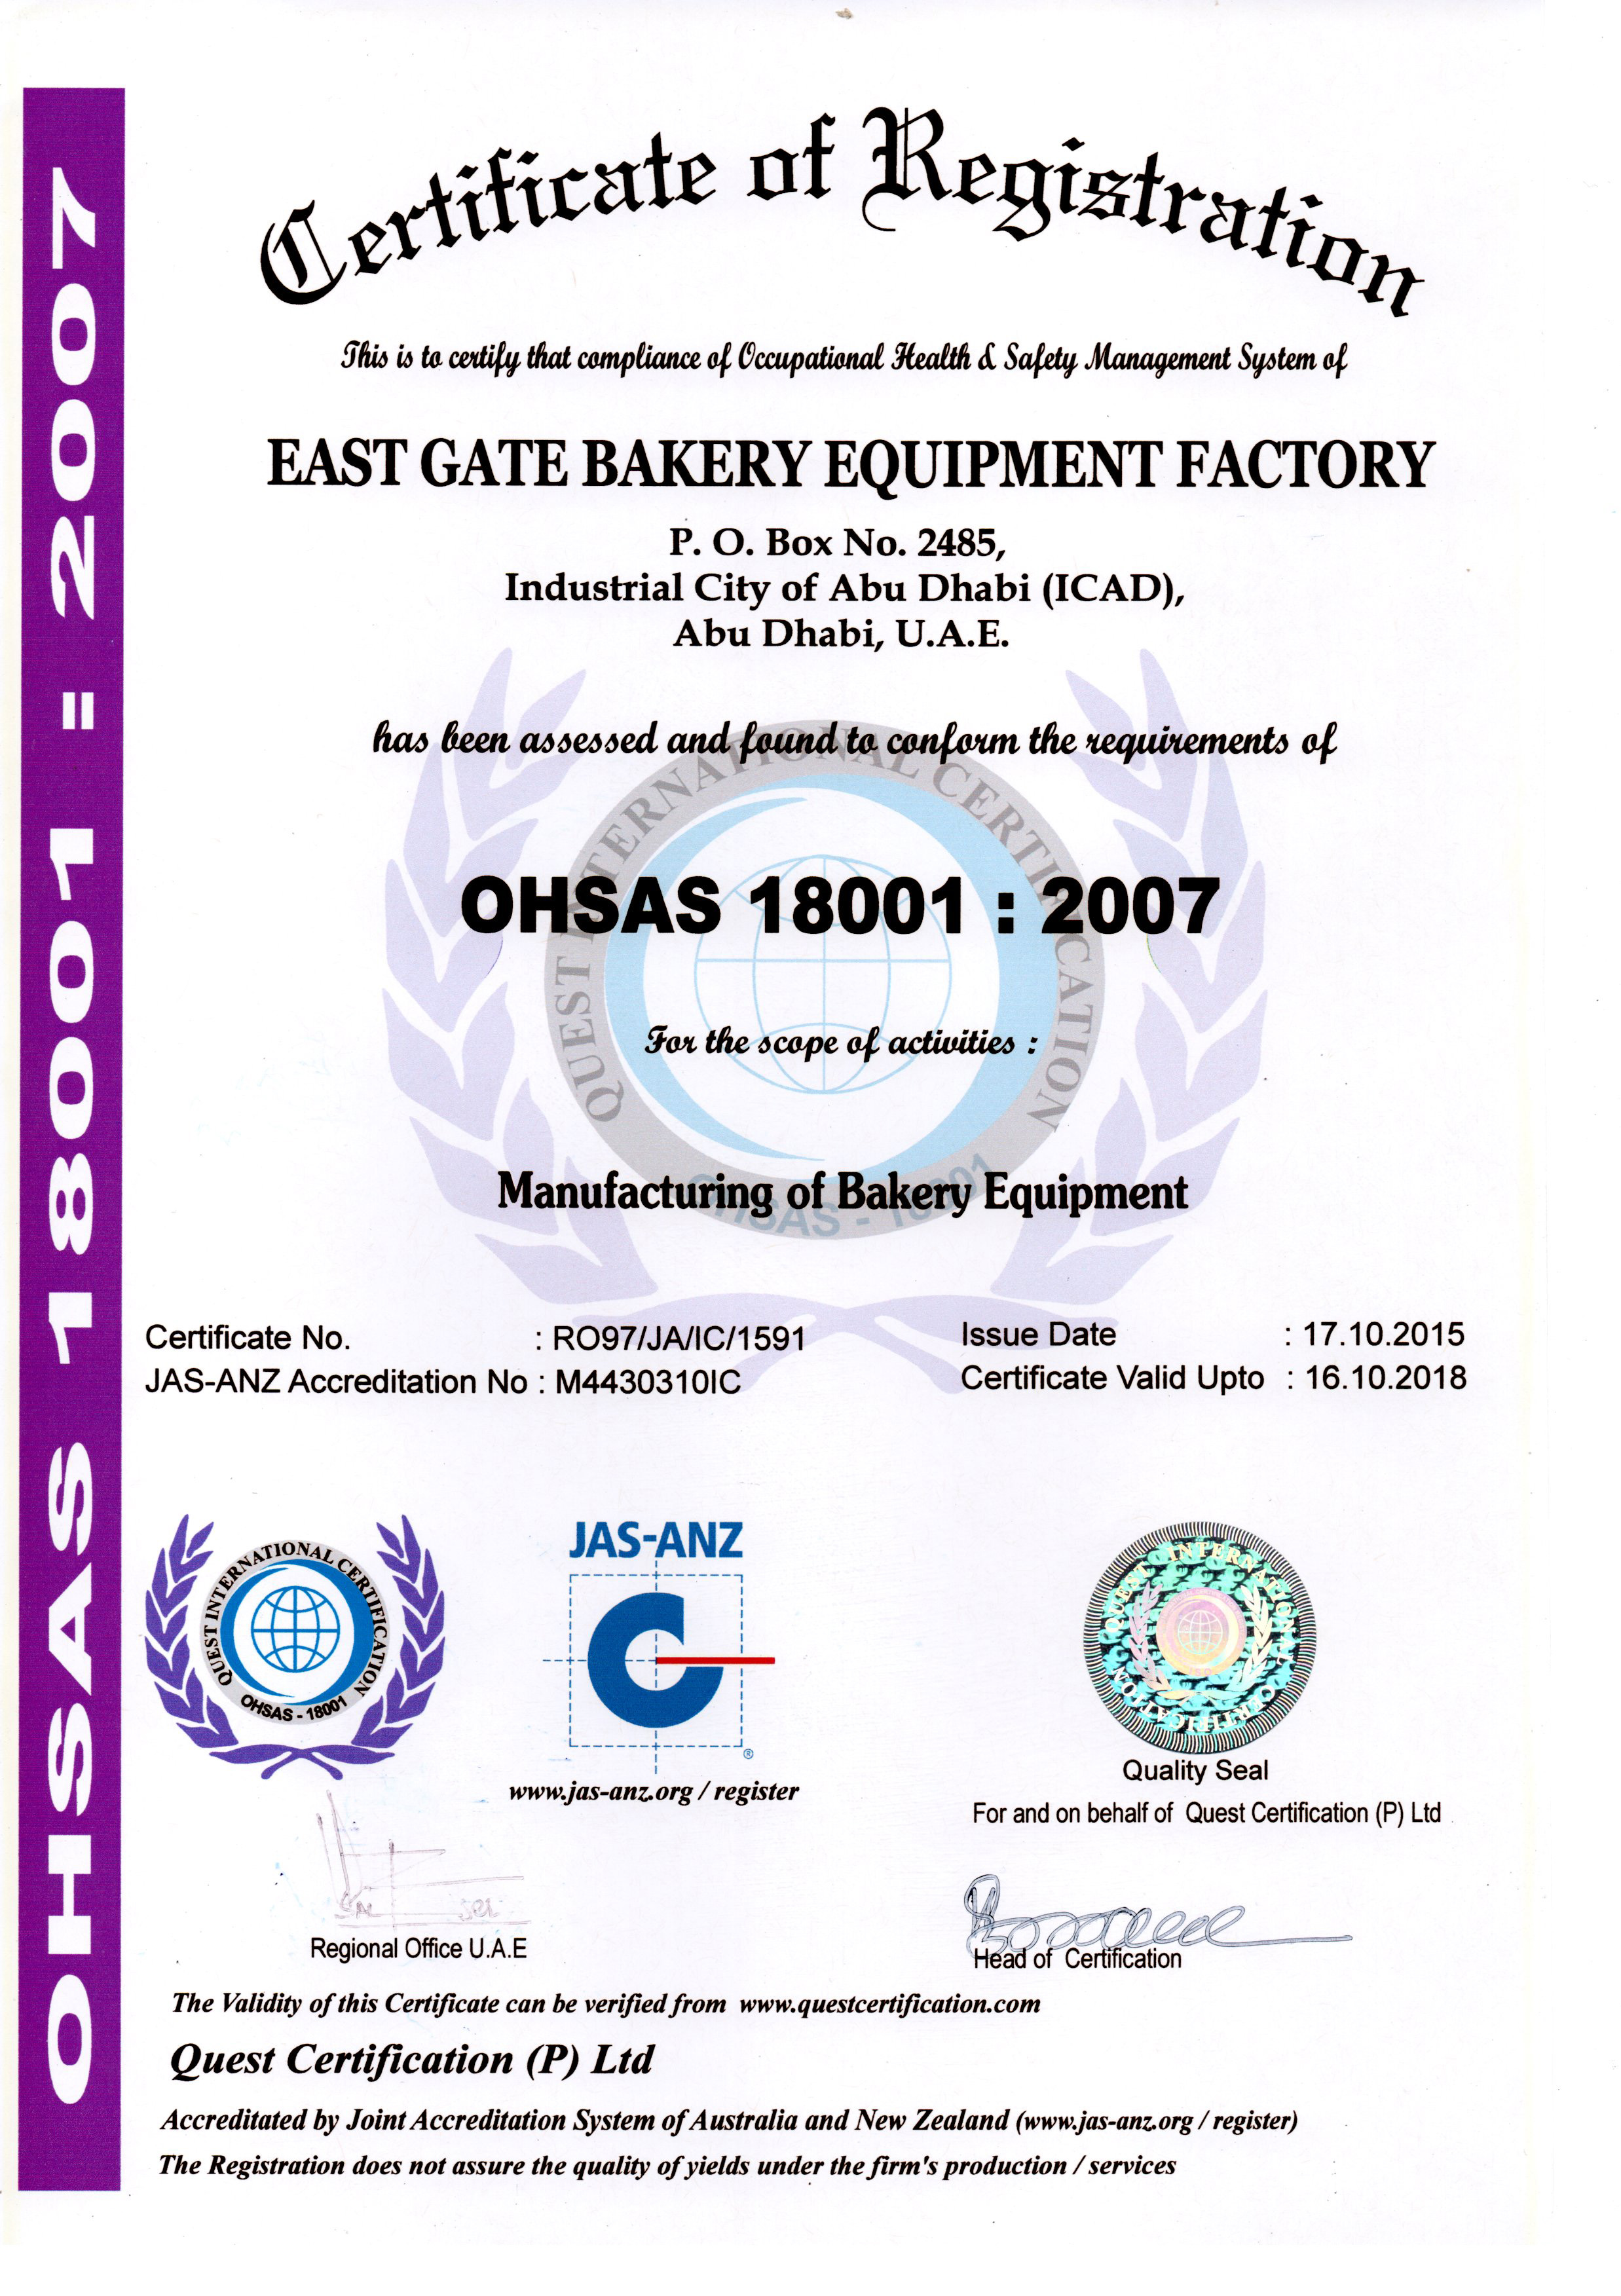 OHSAS 18001-2007 East Gate Bakery Equipment Factory